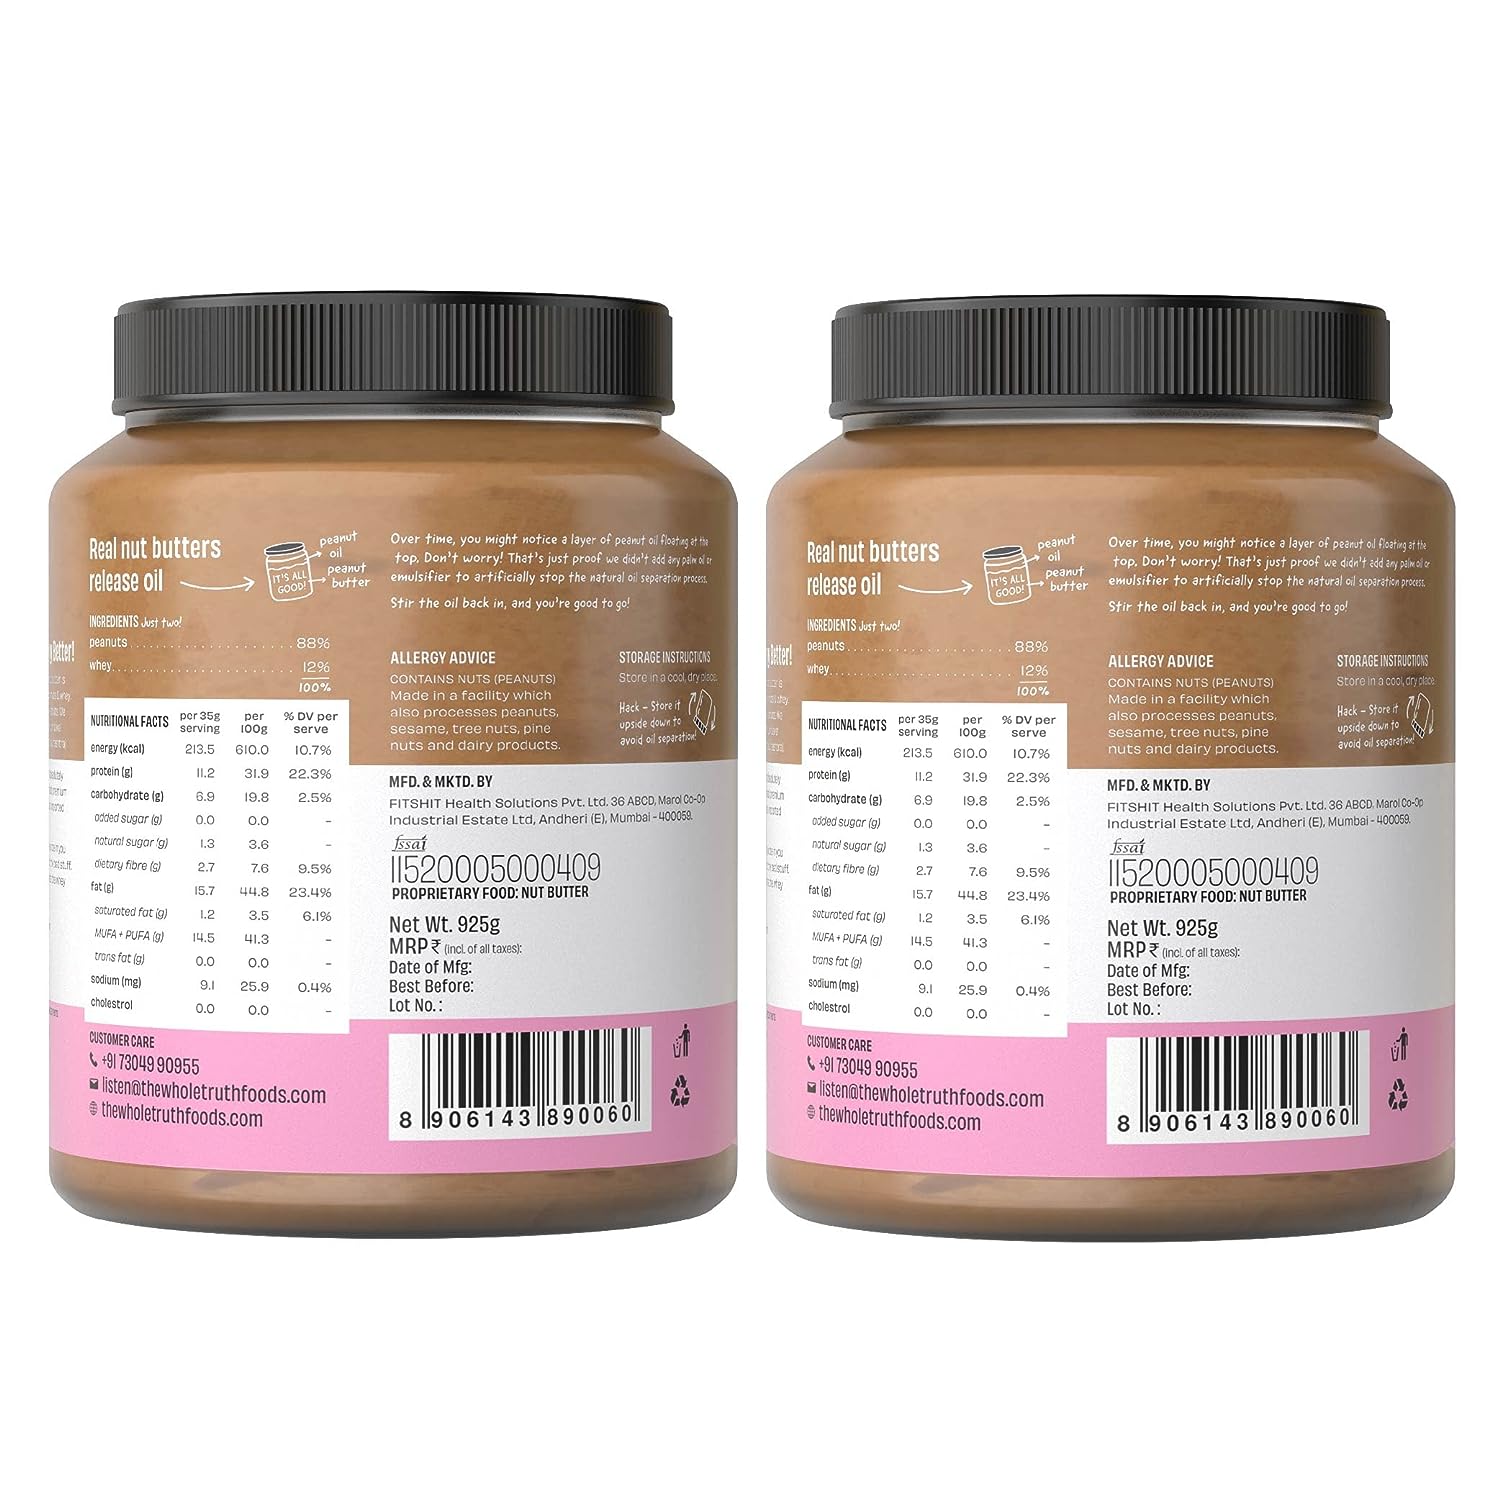 The Whole Truth - Supersaver | Unsweetened Protein Peanut Butter | Pack of 2 | 1850g | Crunchy | No Added Sugar | No Artificial Sweeteners | Gluten Free | No Preservatives | 100% Natural